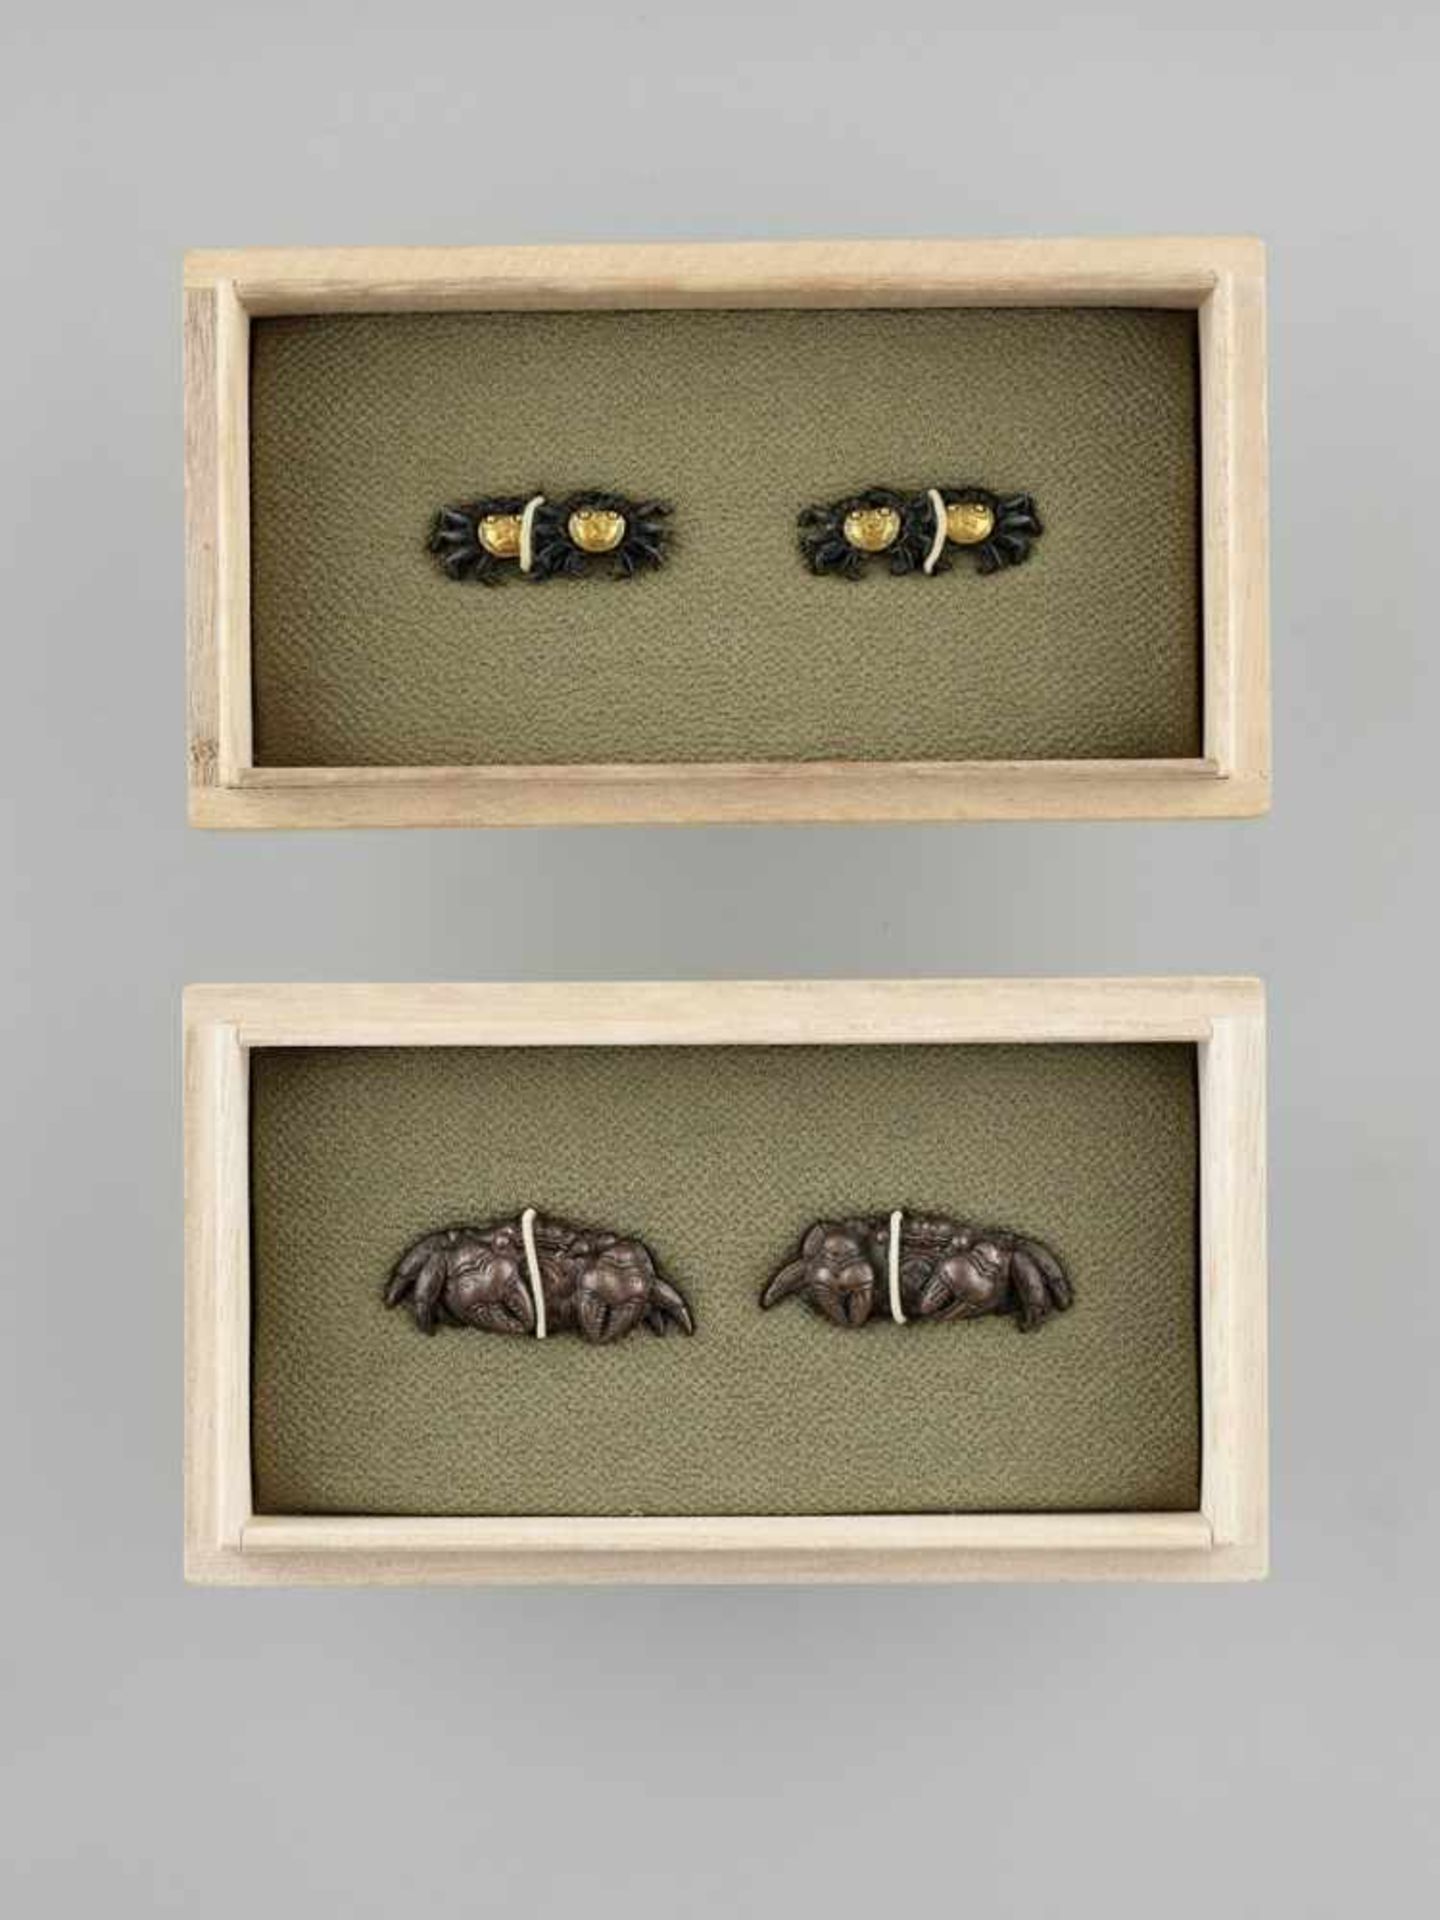 TWO MATCHING PAIRS OF MENUKI DEPICTING CRABS Japan, 19th century, Edo period (1615-1868)The first - Image 3 of 4